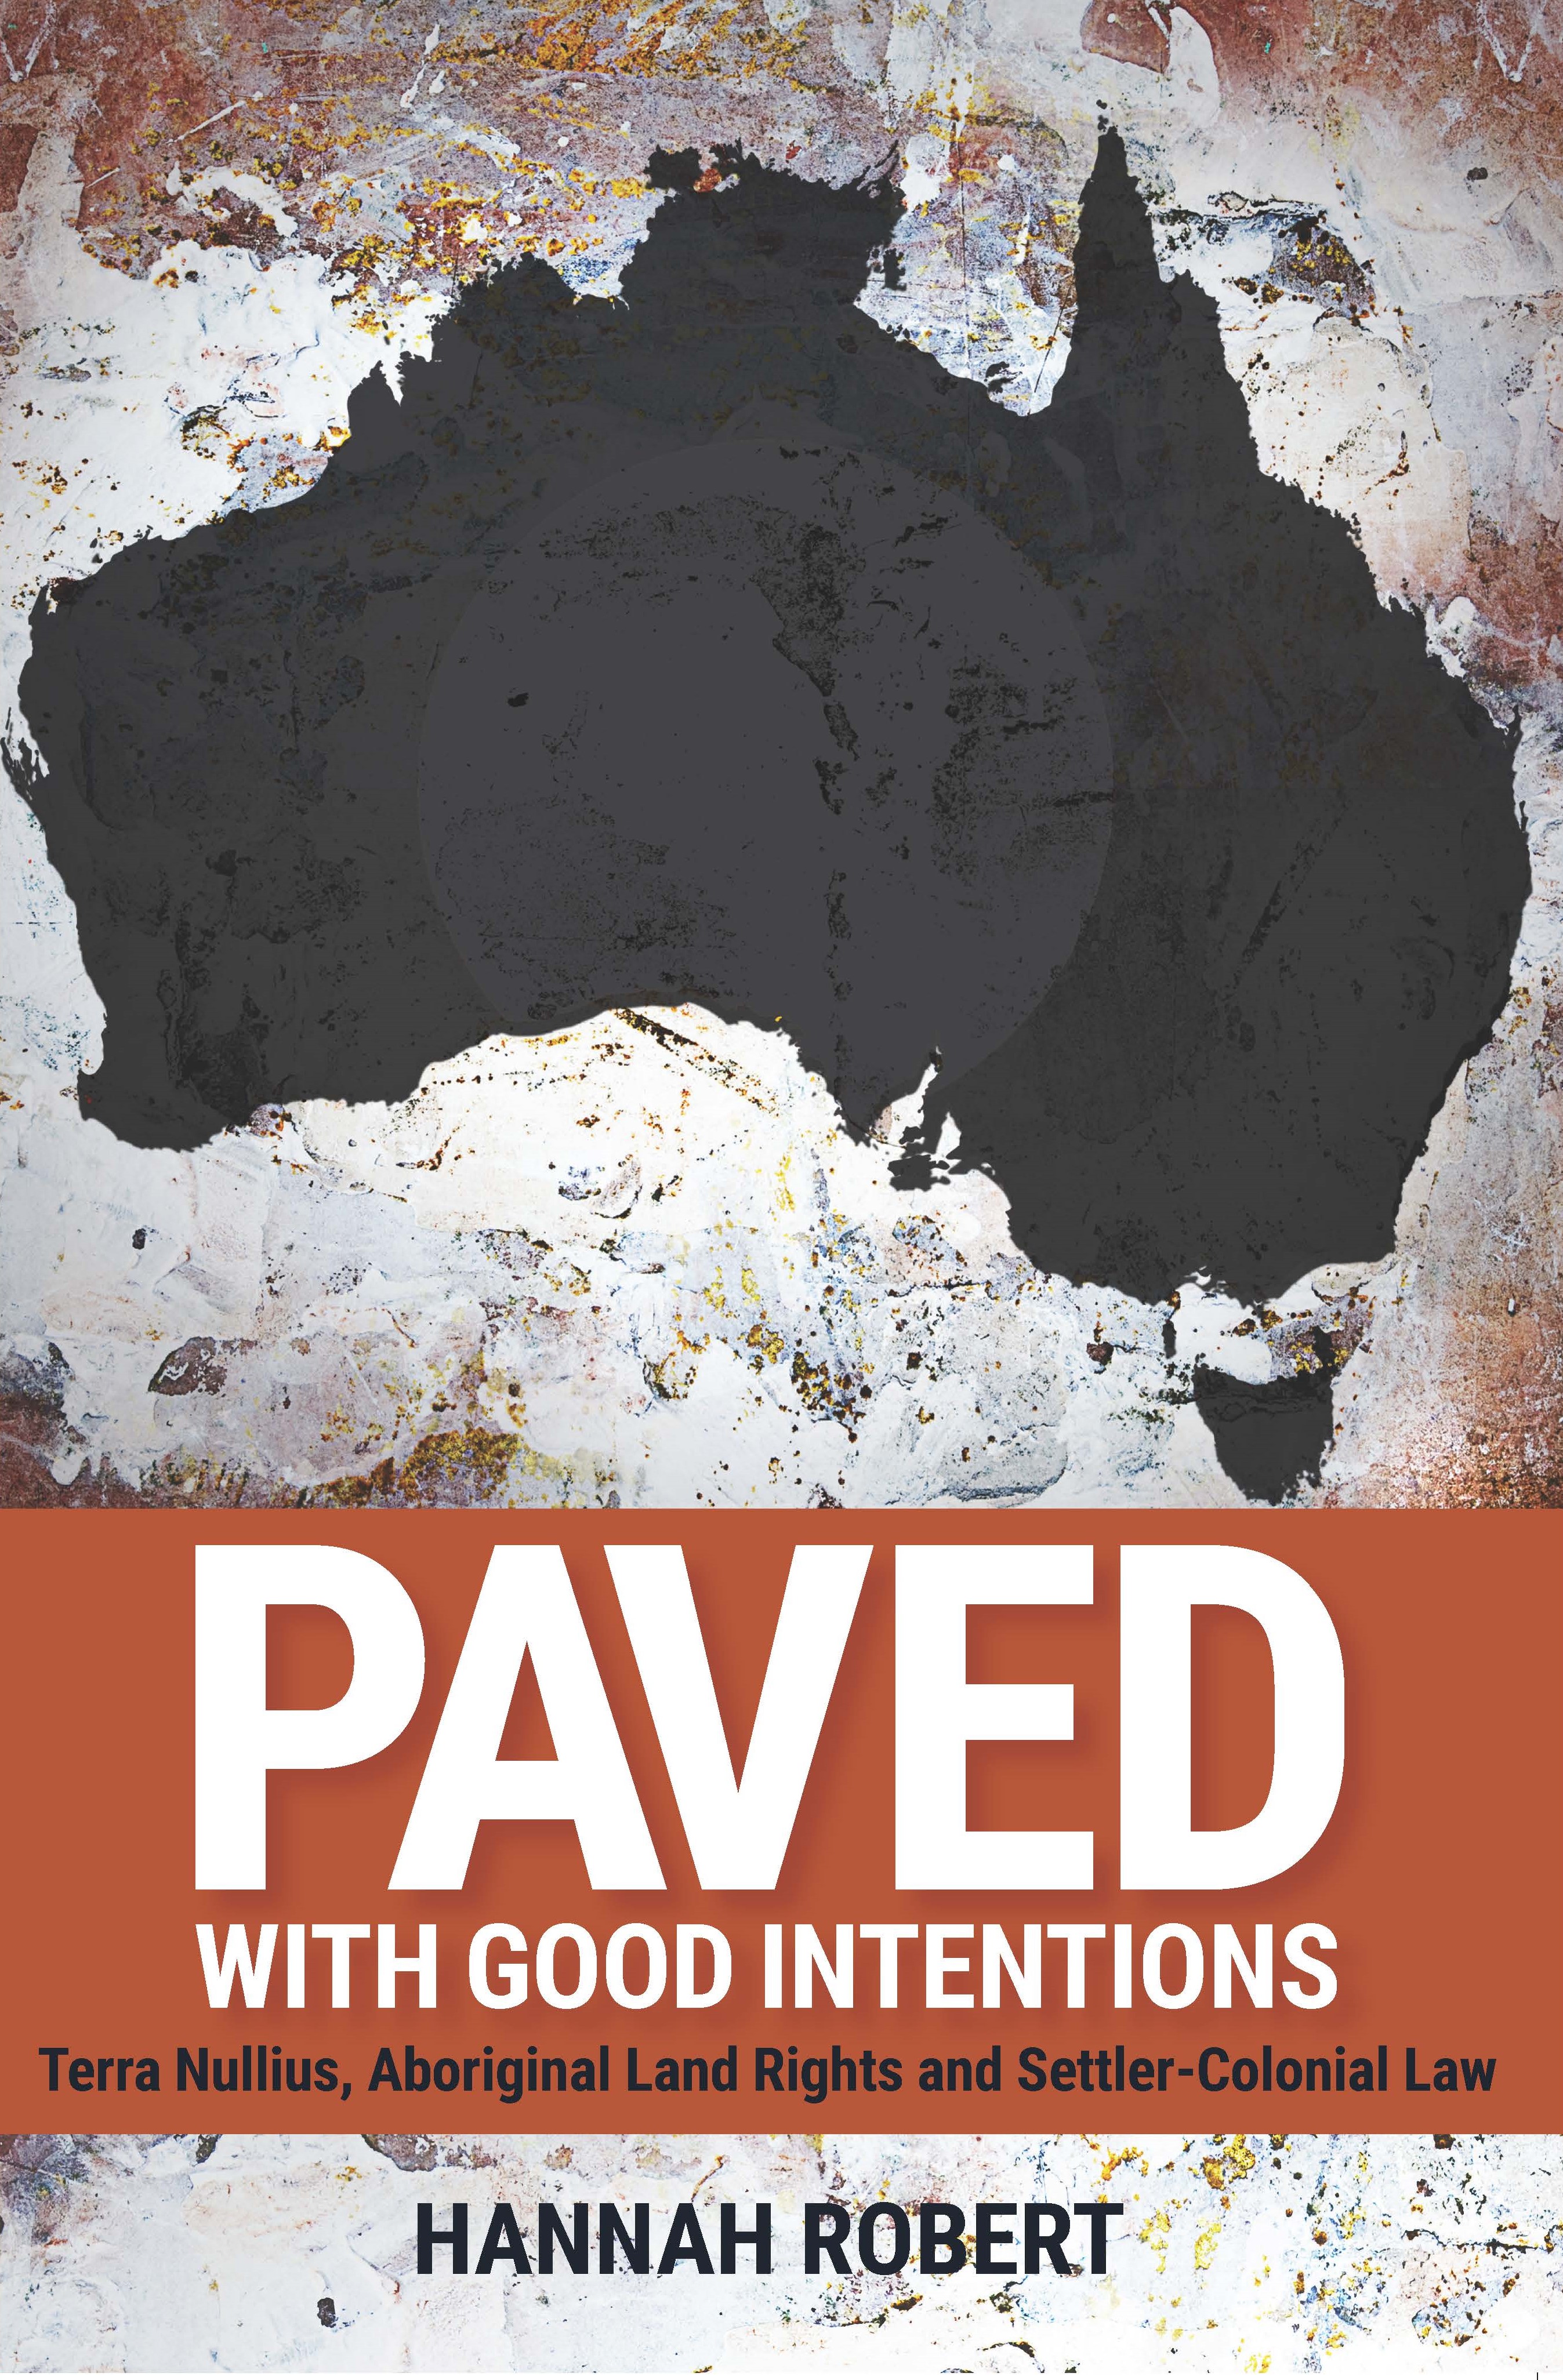 Paved with good intentions